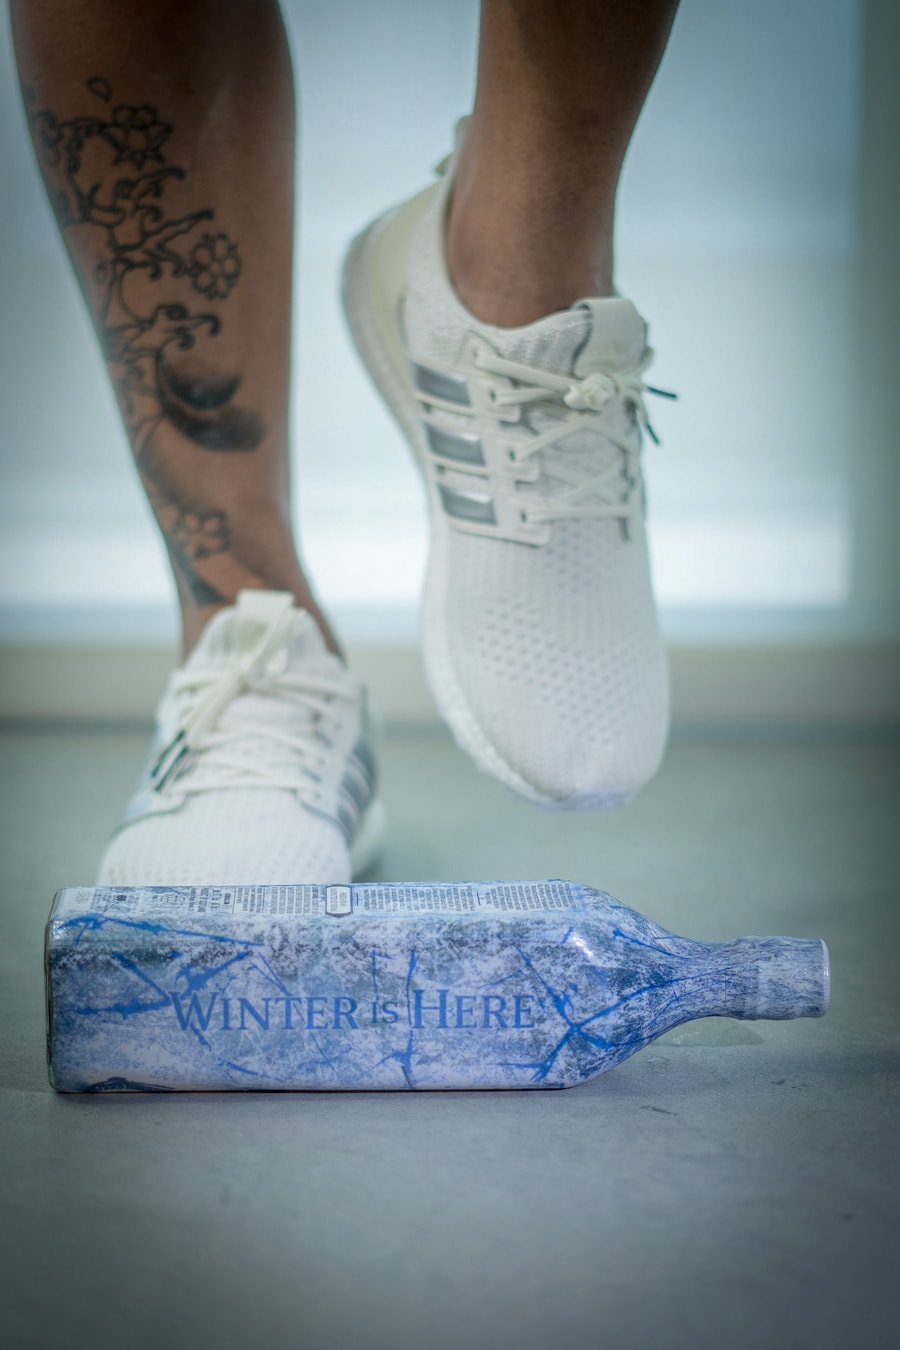 Game of Thrones x adidas UltraBOOST On-Foot